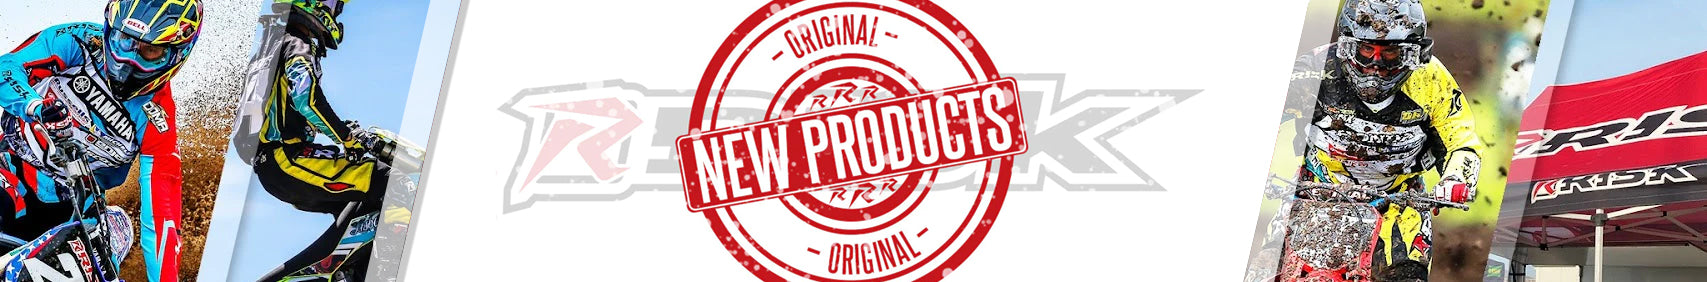 Risk Racing's New Products collection banner featuring a stamp design with text.